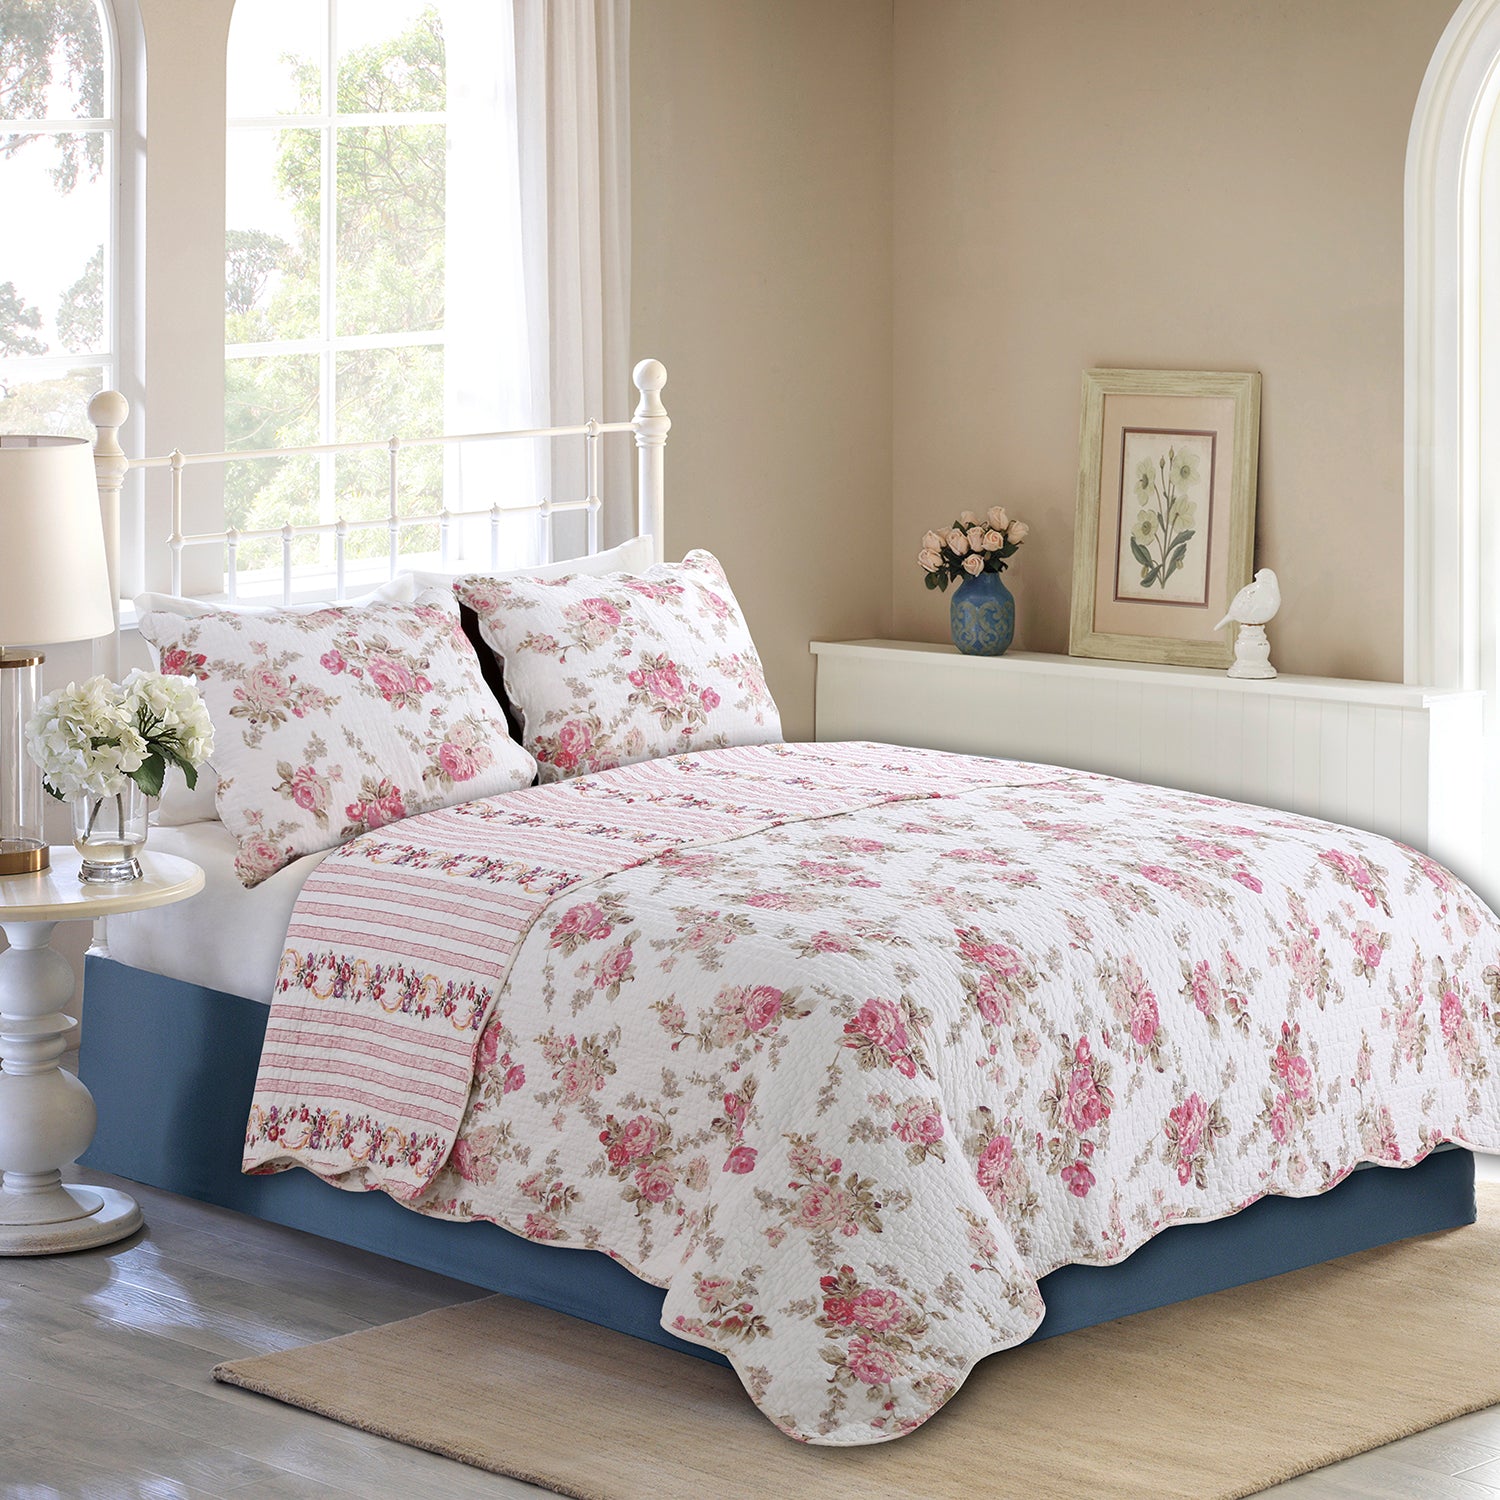 Cozy Line Home Fashions Floral Vine Country Cottage Flower Garden